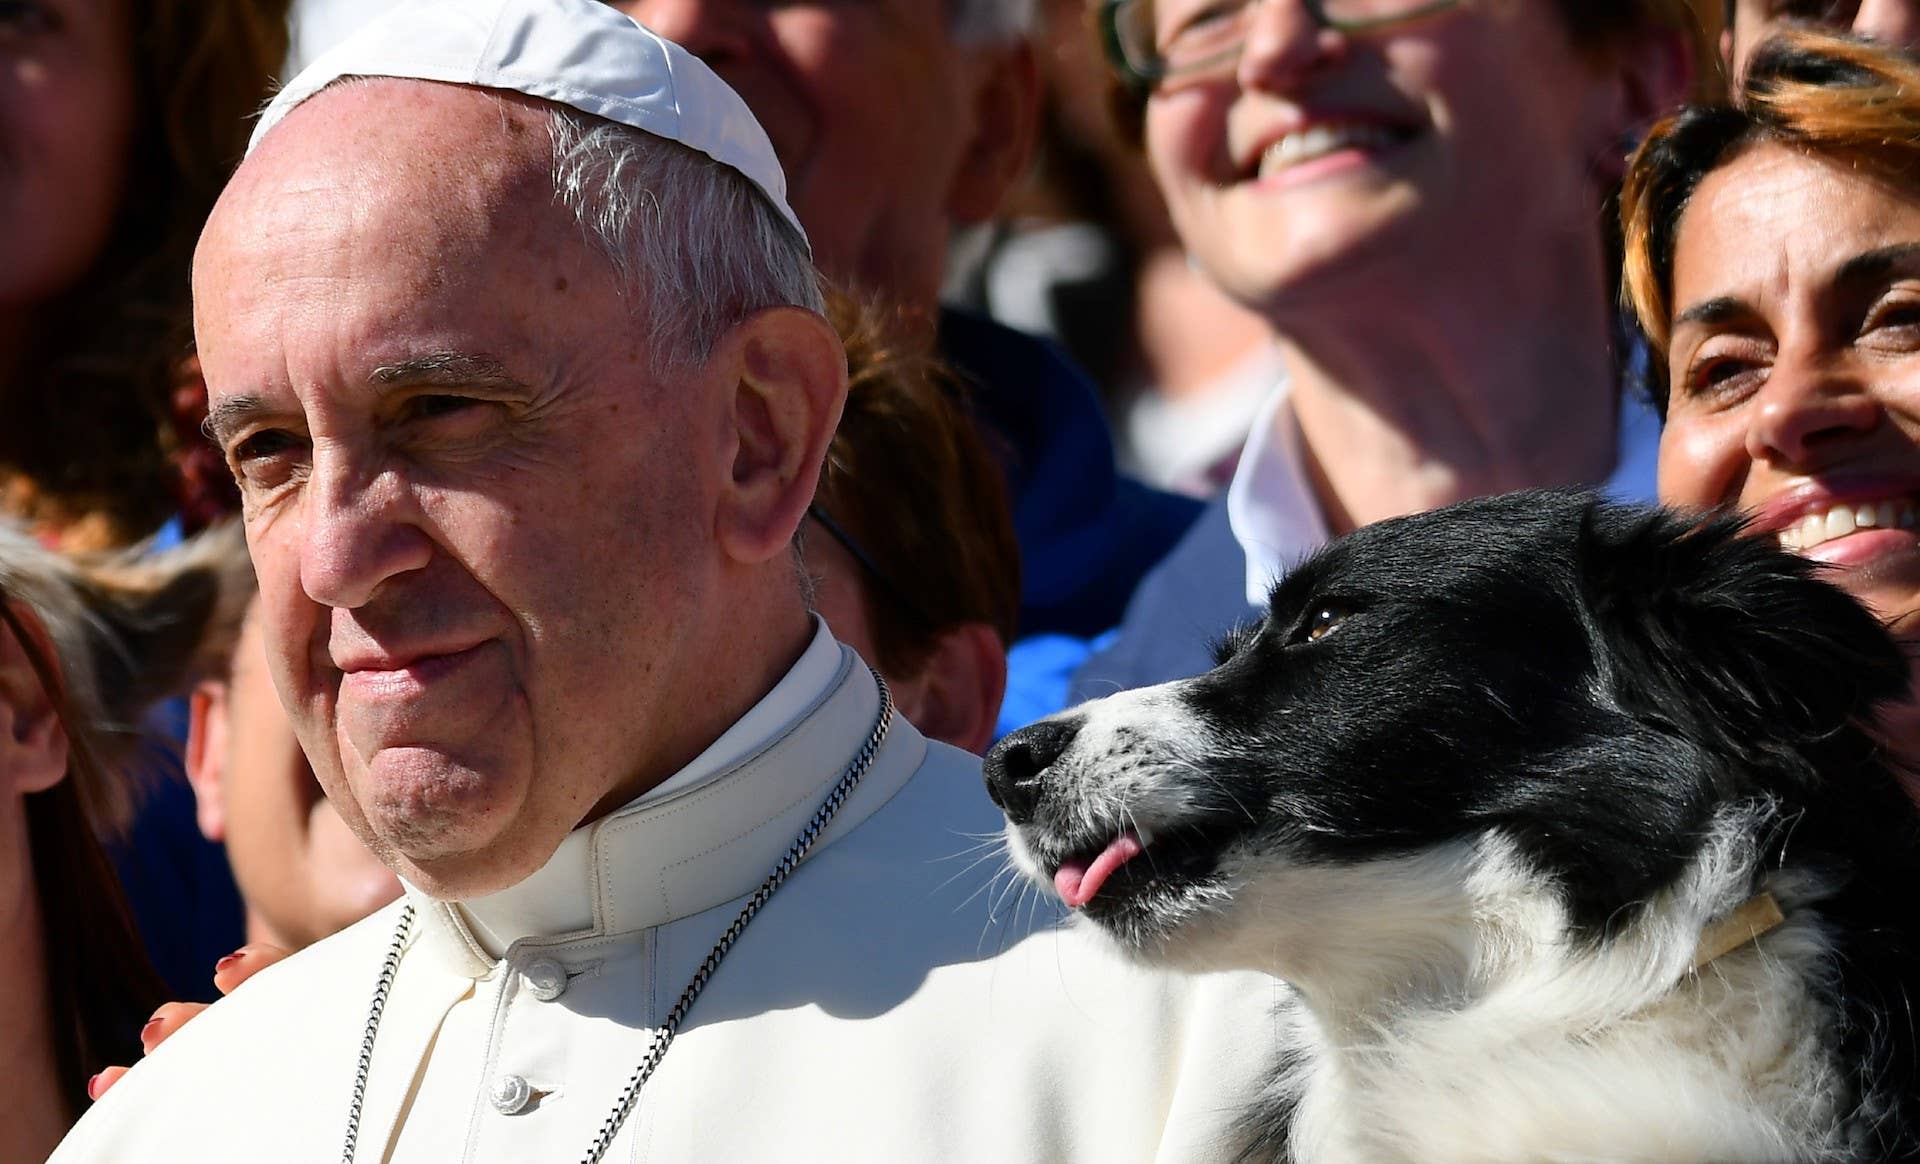 The Pope says thing about animals